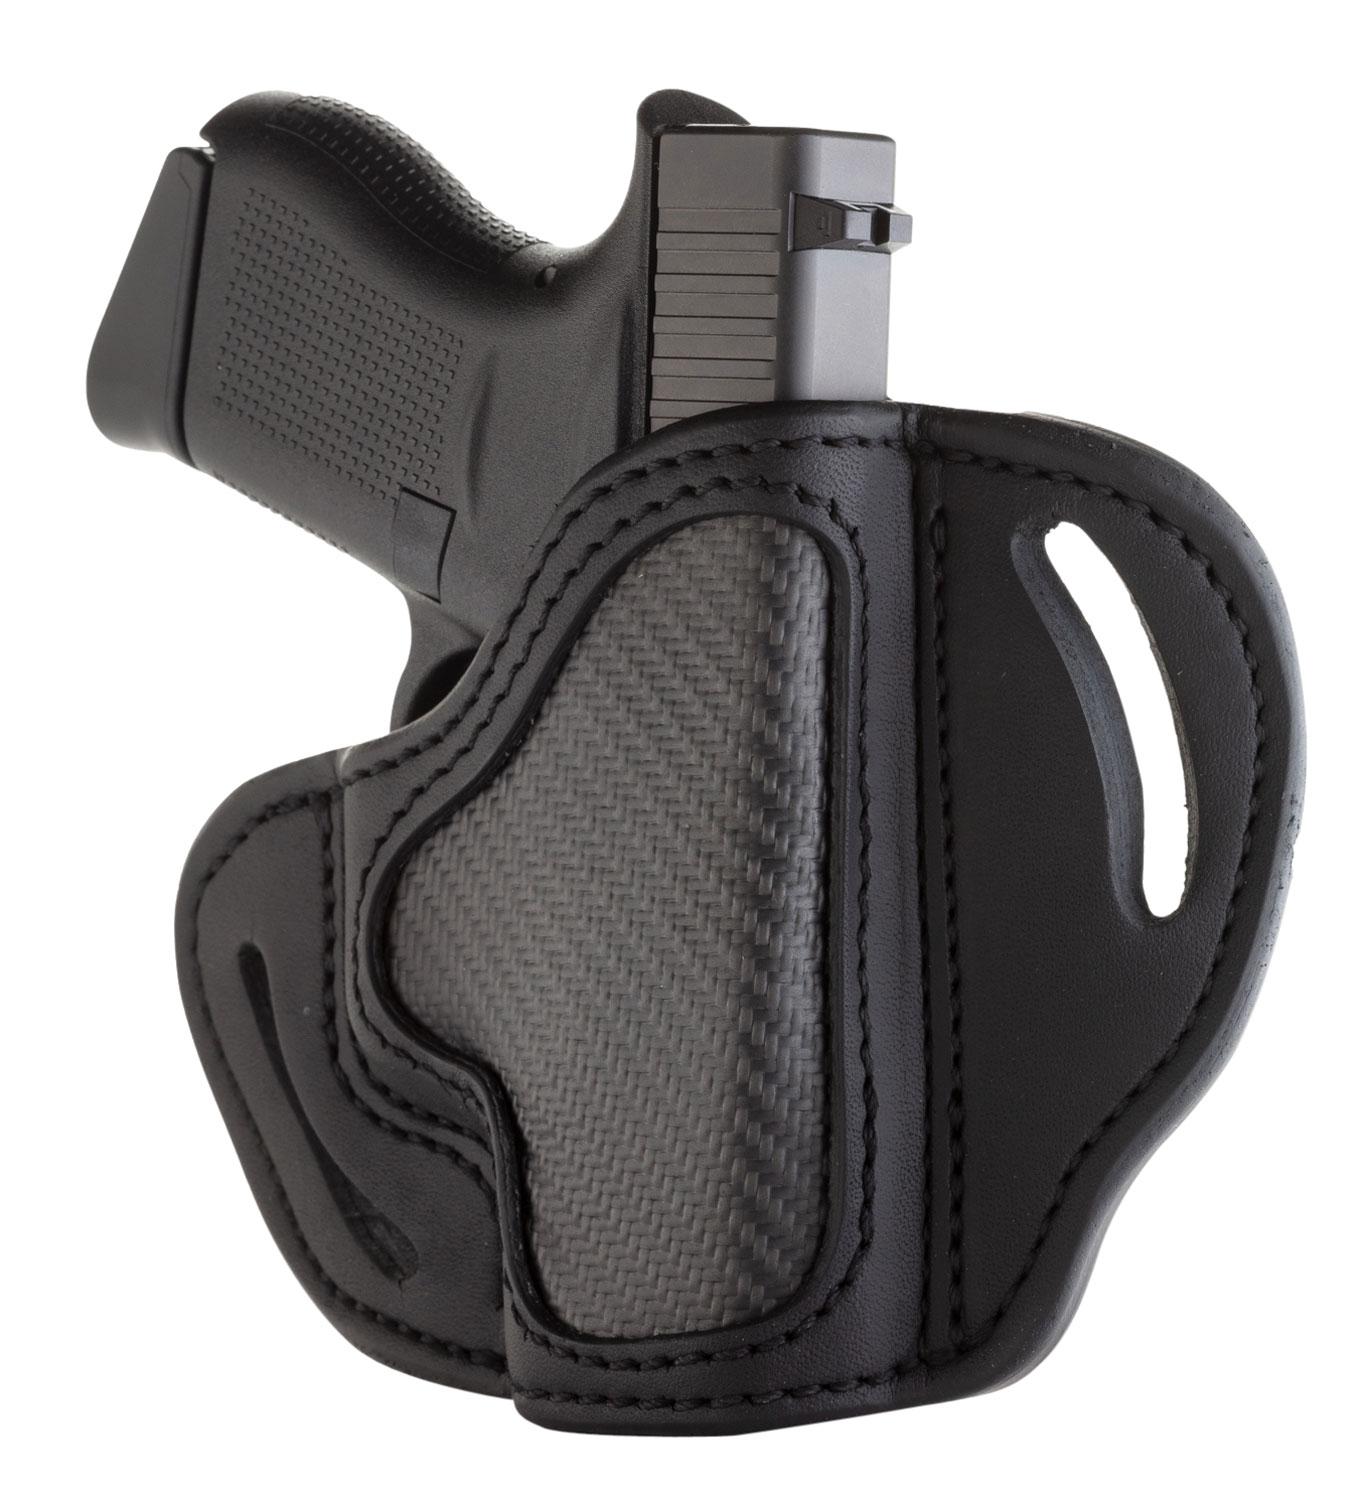  Open Top Owb Compact Multi- Fit Belt Holster Stealth Black Rh Size C